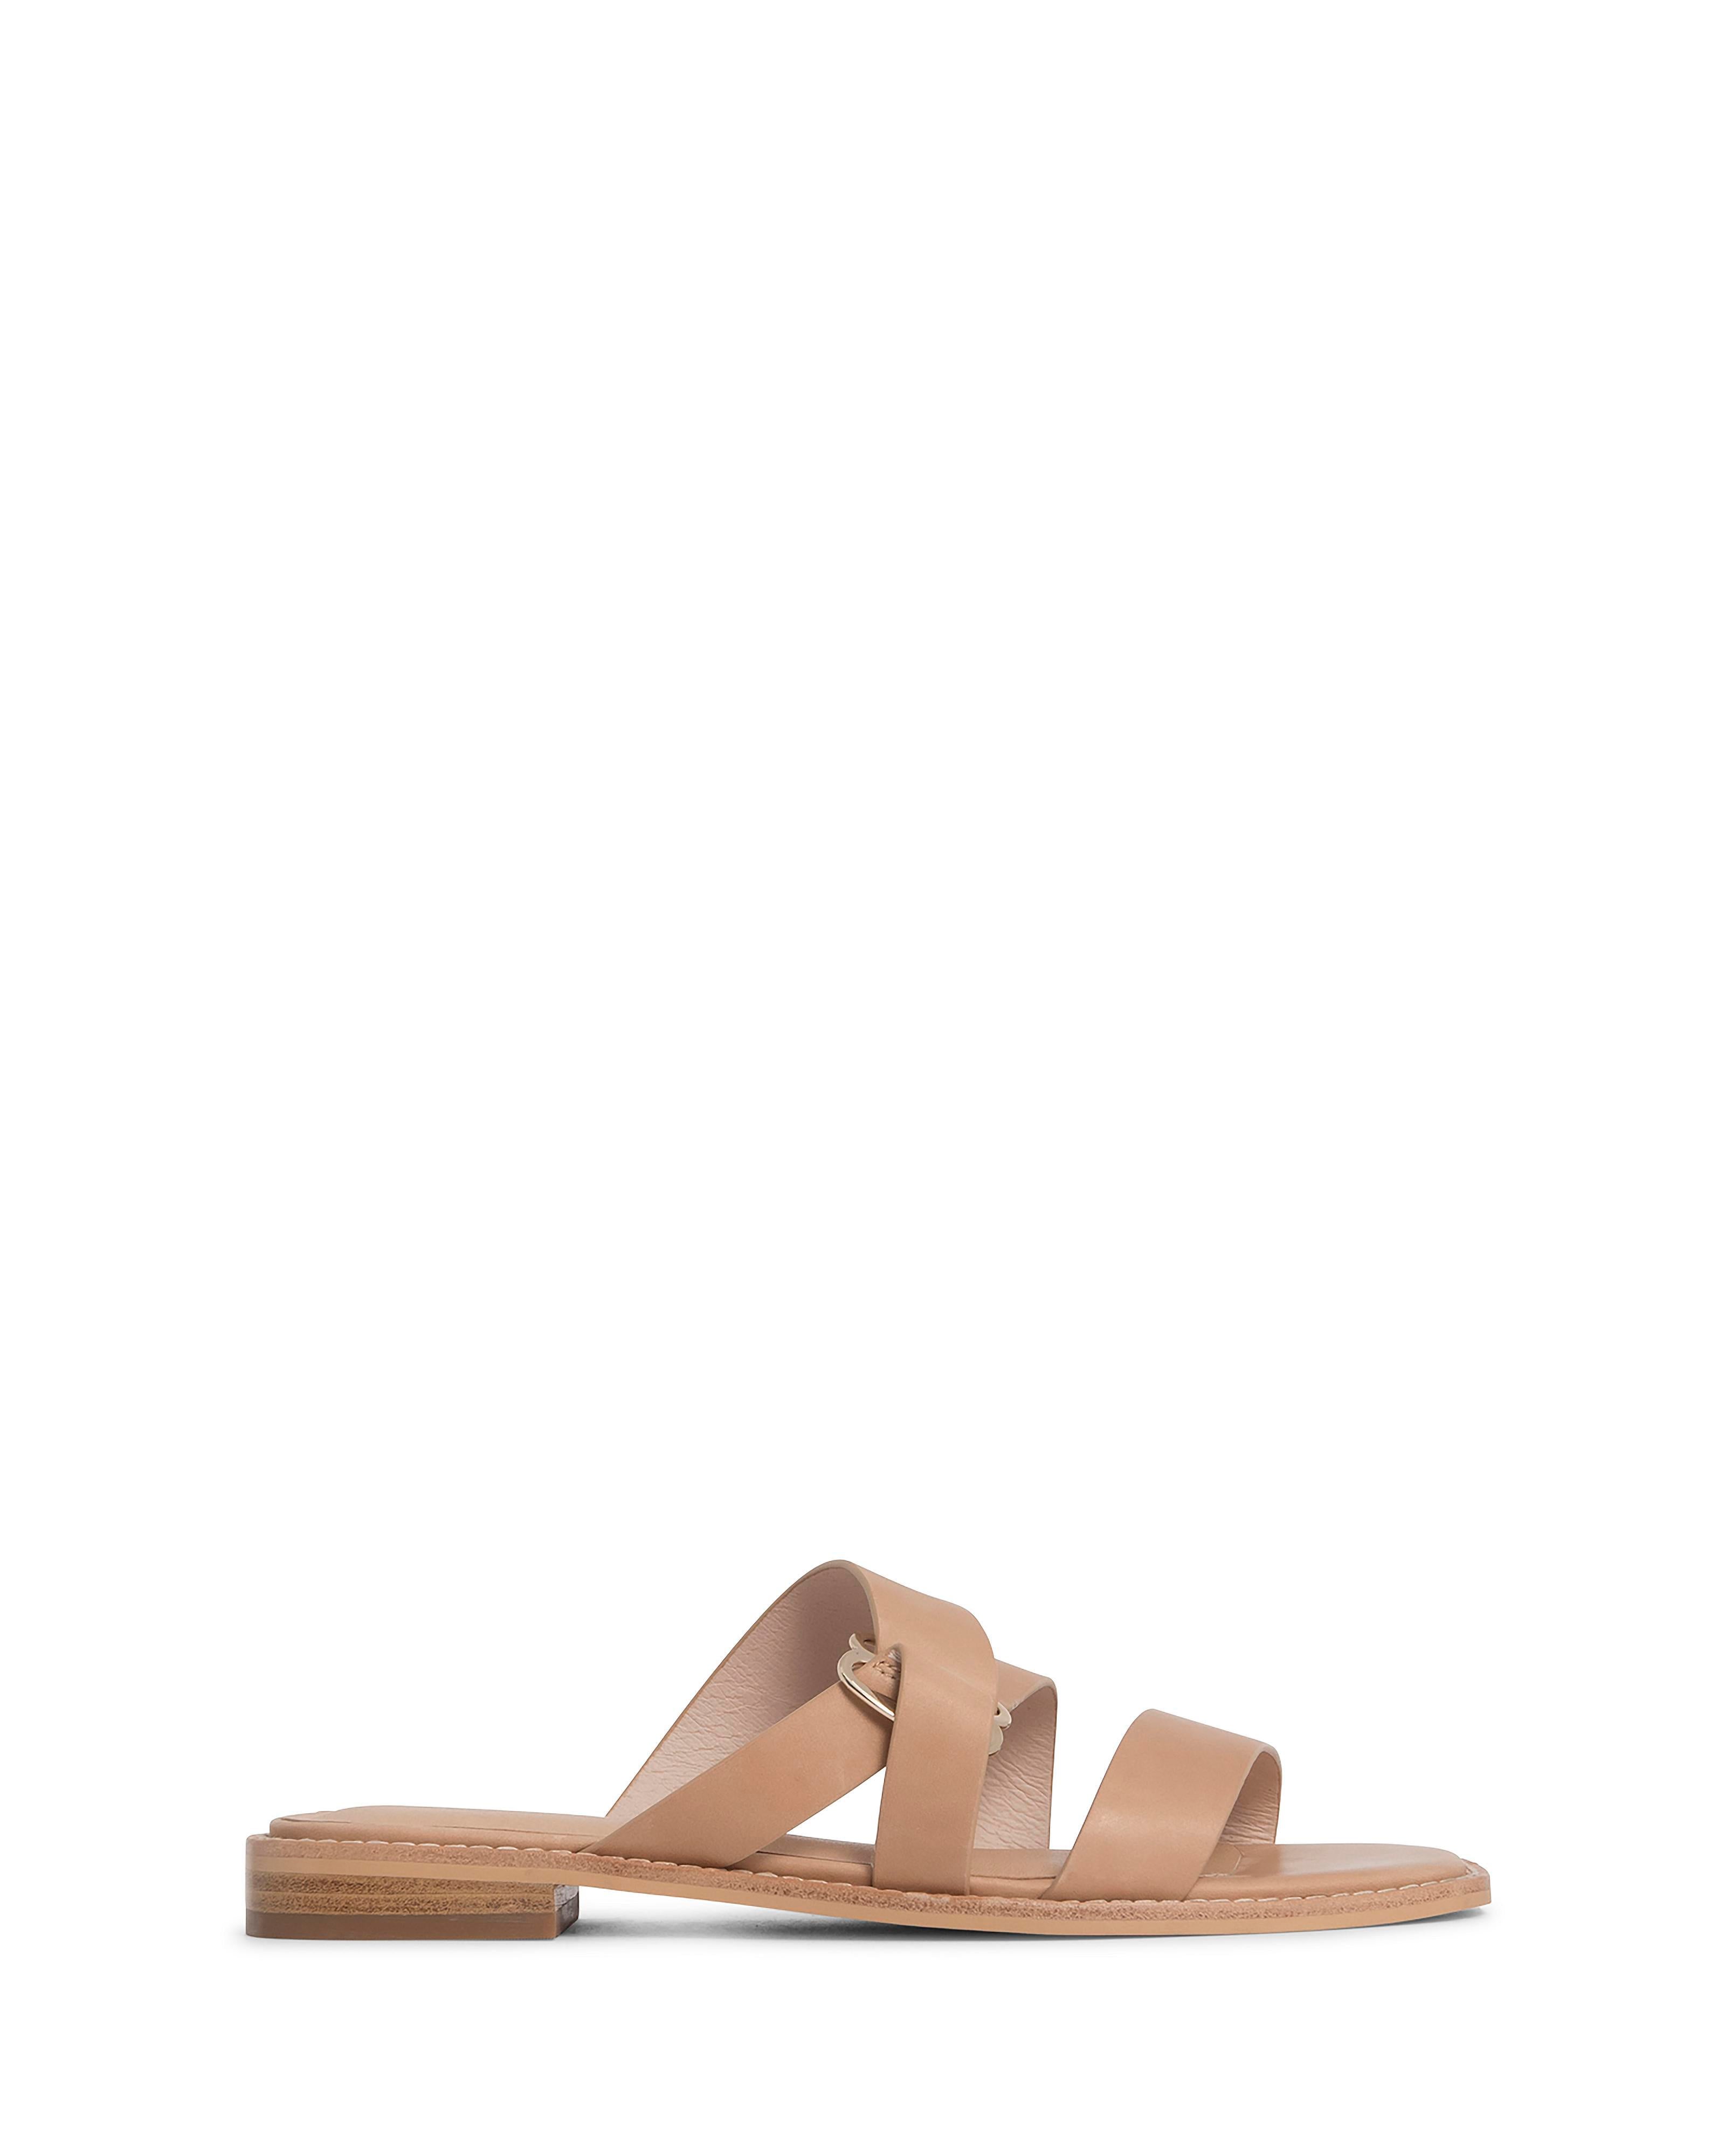 Adley Natural  1cm Sole Sandal with Gold Buckle Detail